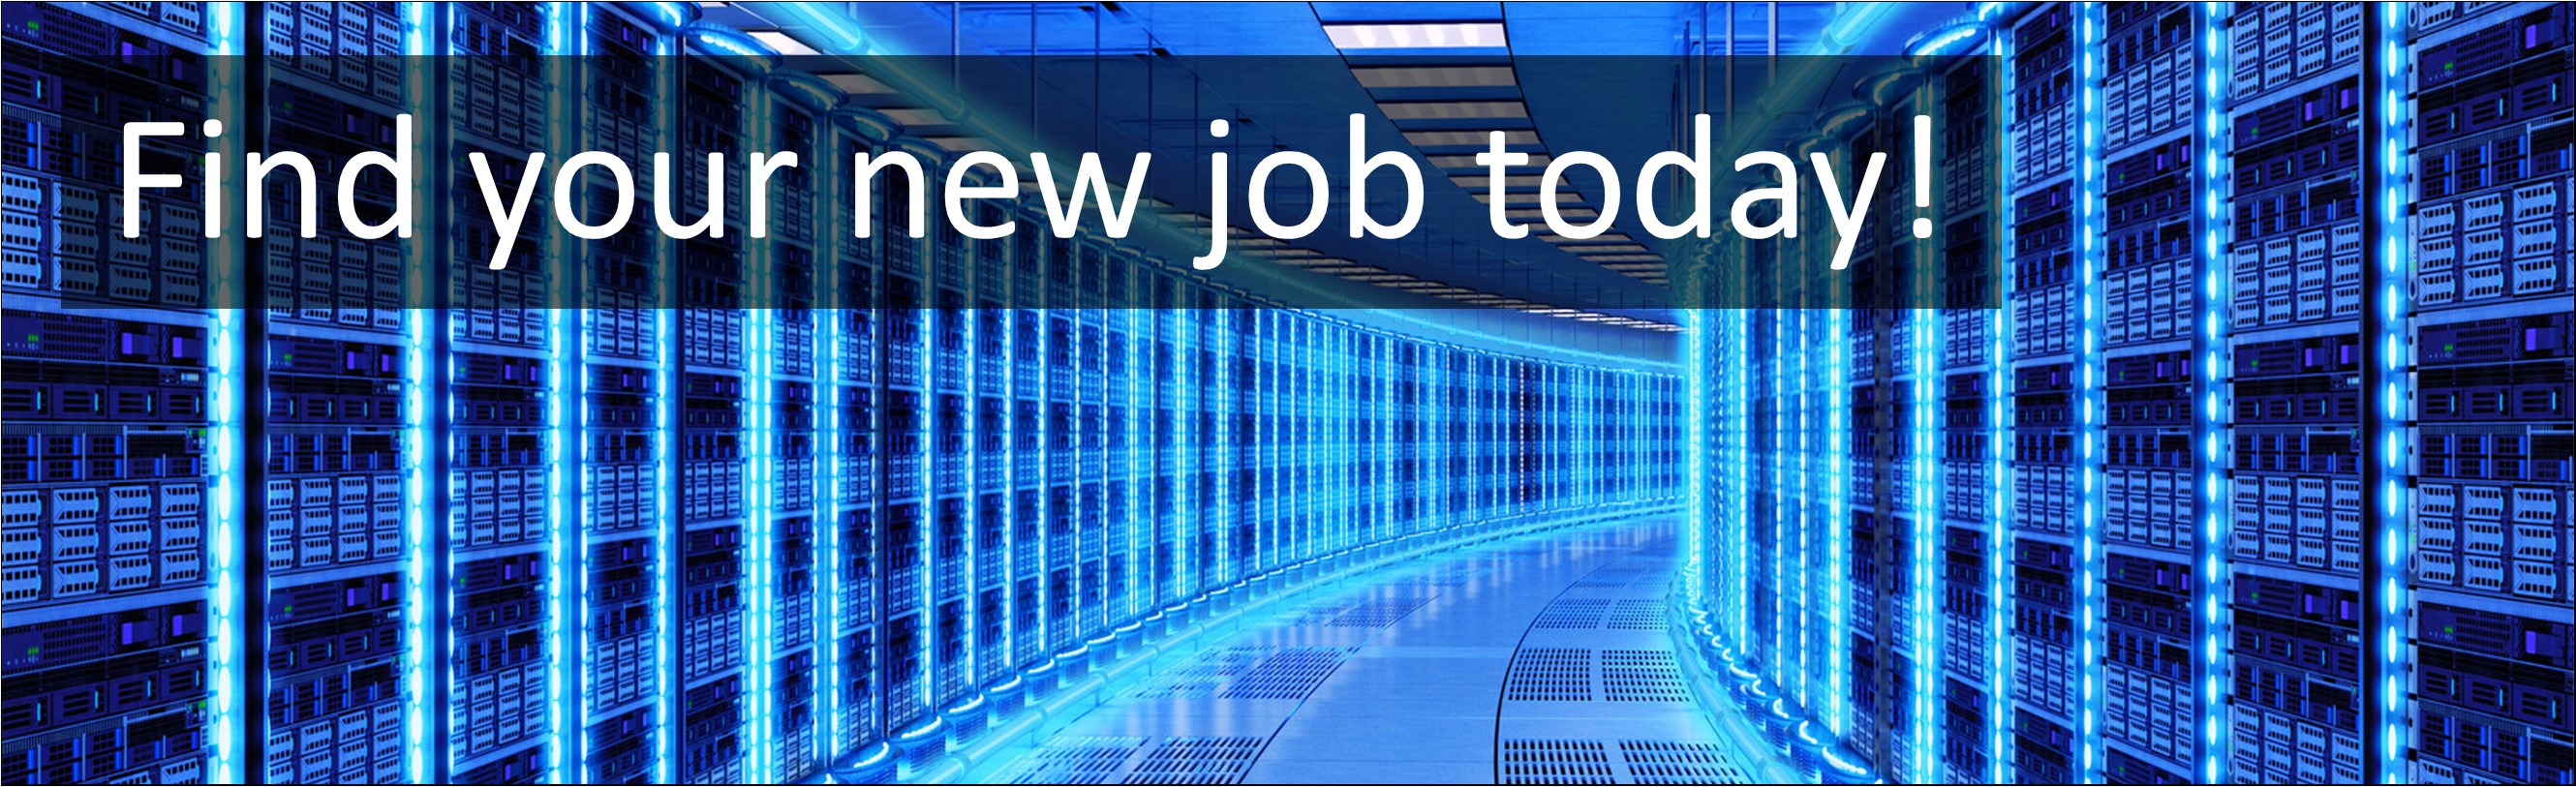 IT & Communication Jobs. Senior IT Support Engineer / Service Desk Technician Jobs, Careers & Vacancies in Milton Keynes, Buckinghamshire Advertised by AWD online – Multi-Job Board Advertising and CV Sourcing Recruitment Services